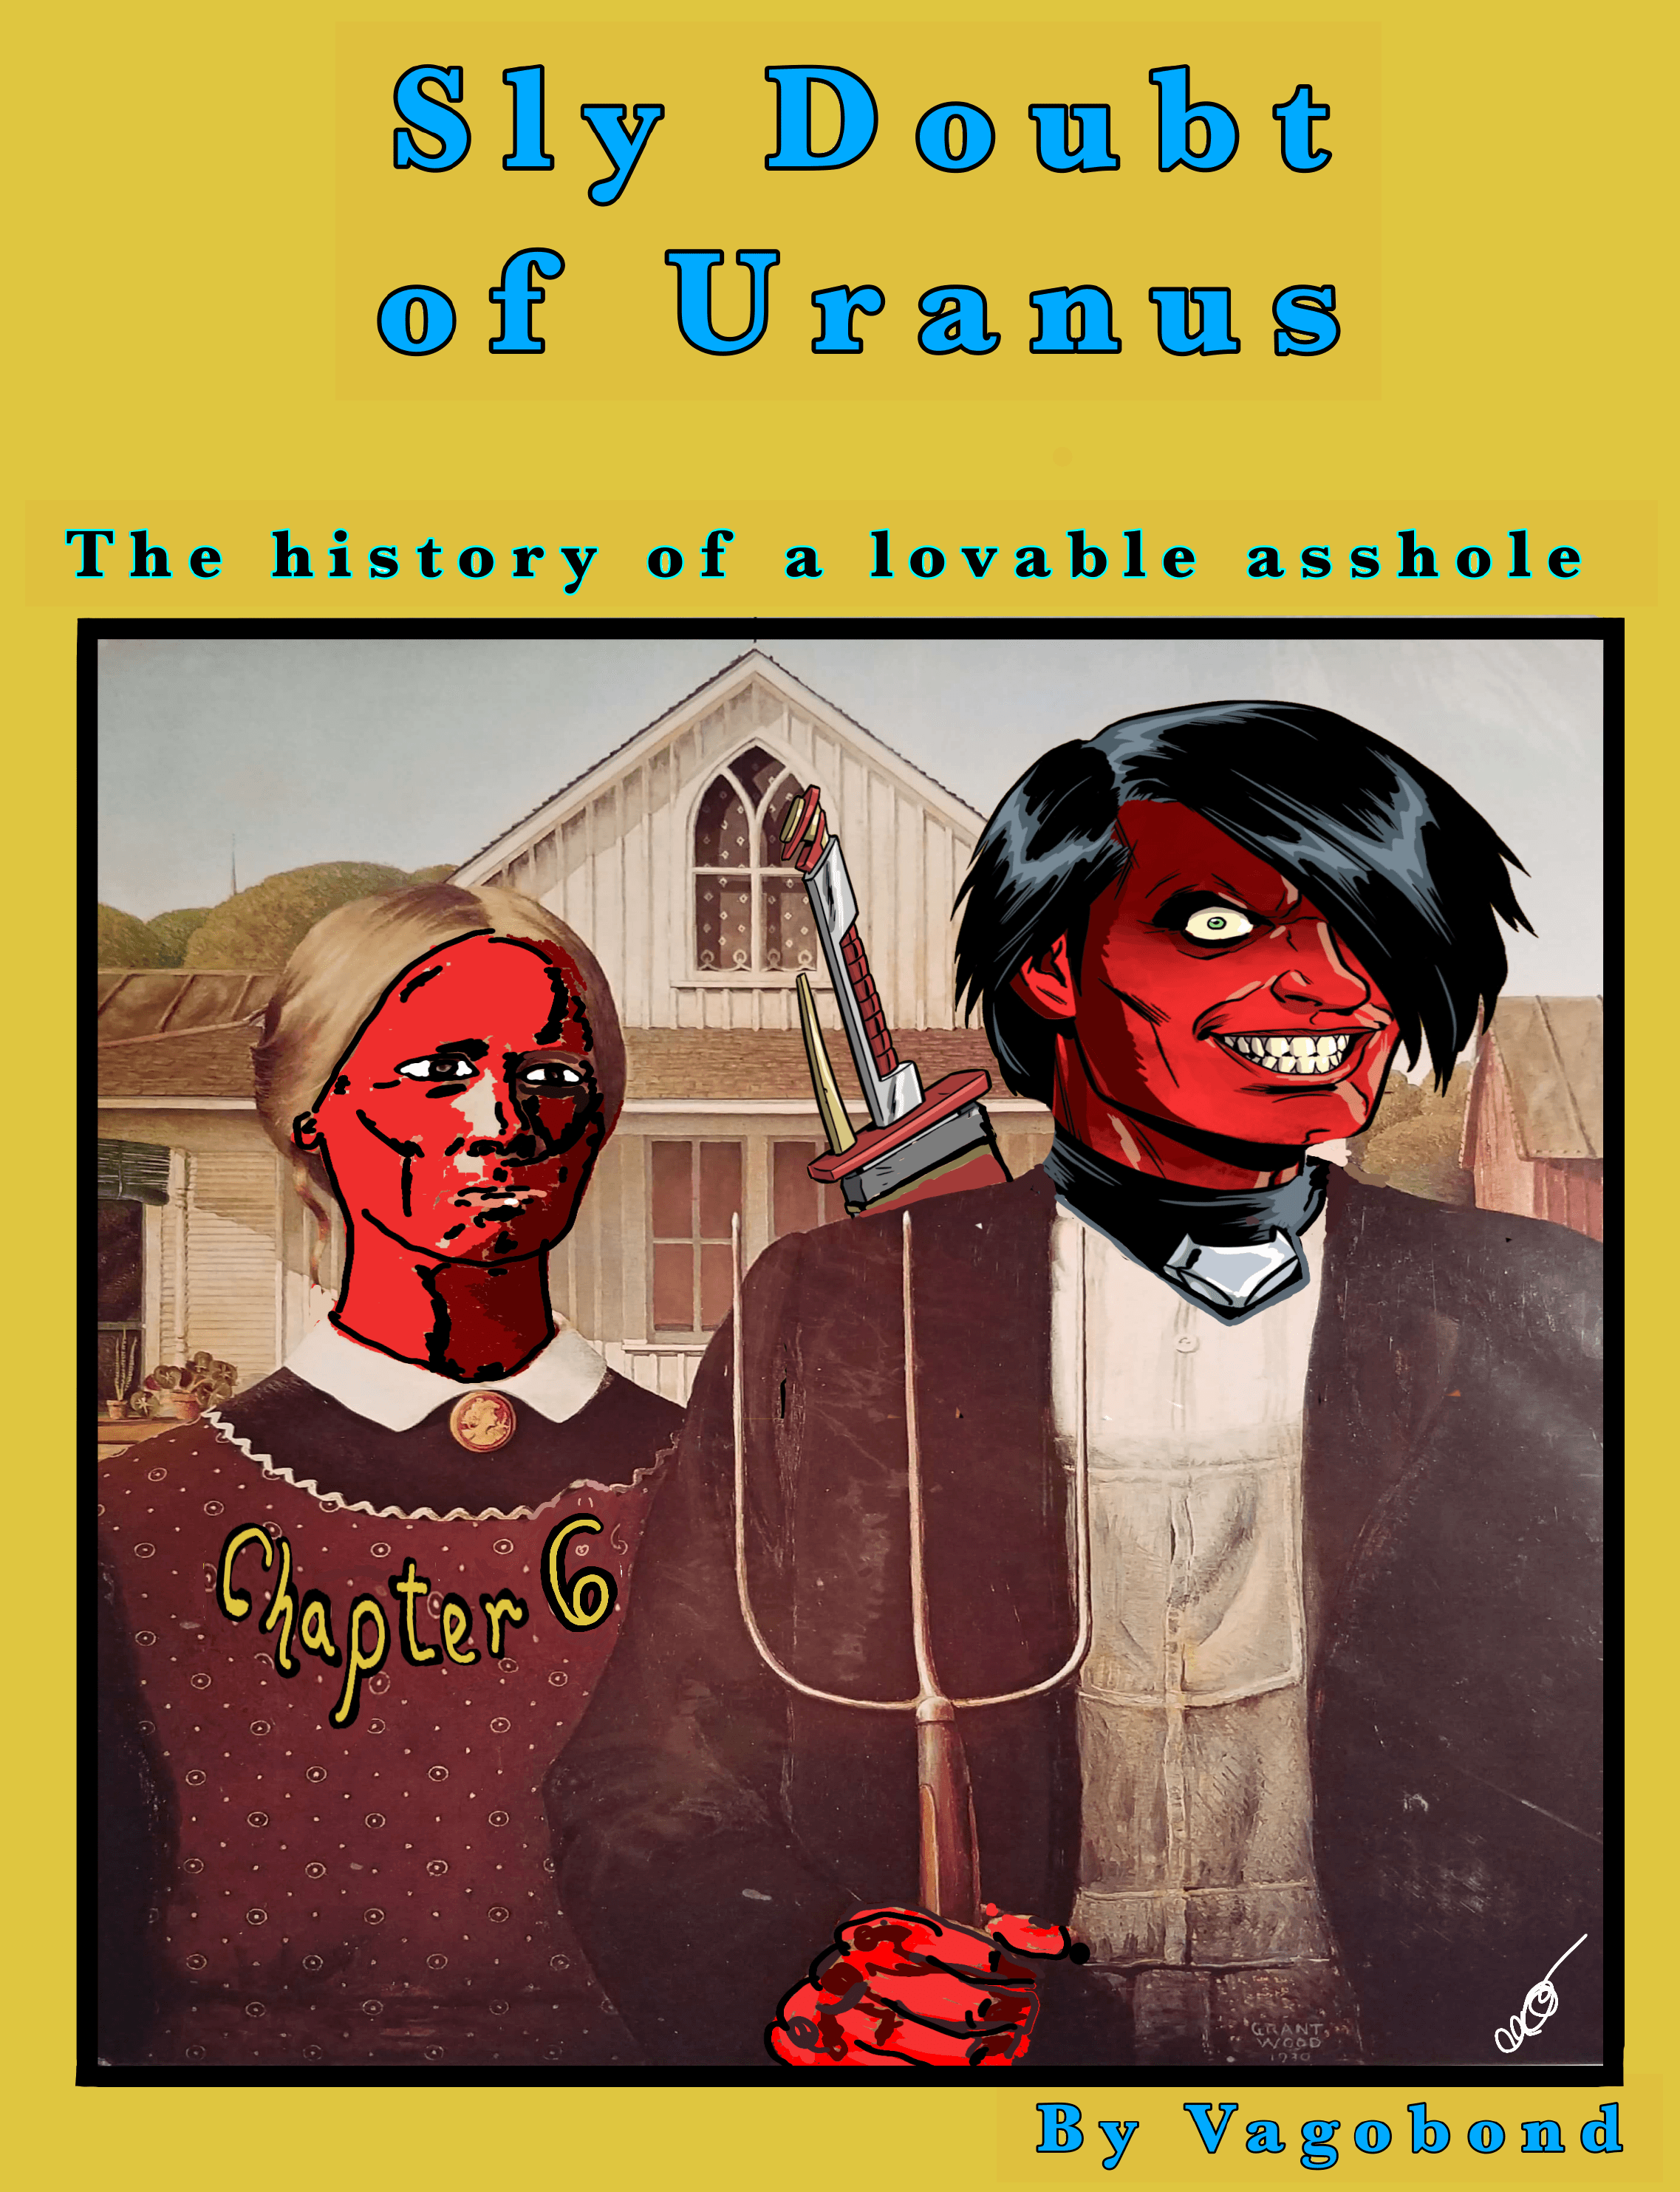 Sly Doubt of Uranus: The History of a Lovable Asshole - Chapter 6: 1st Edition 